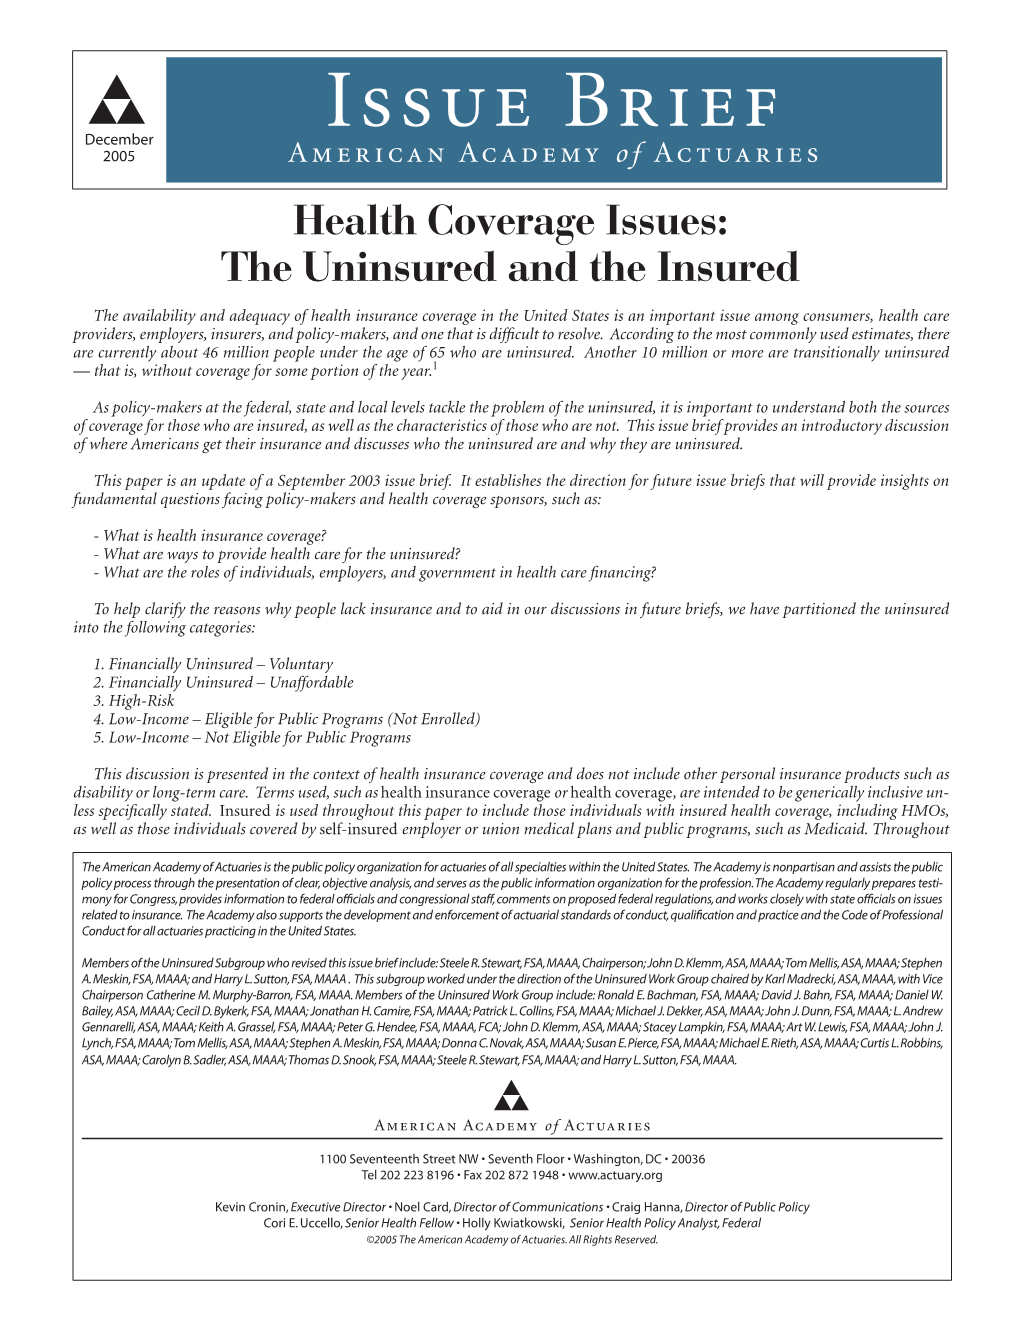 Health Coverage Issues: the Uninsured and the Insured